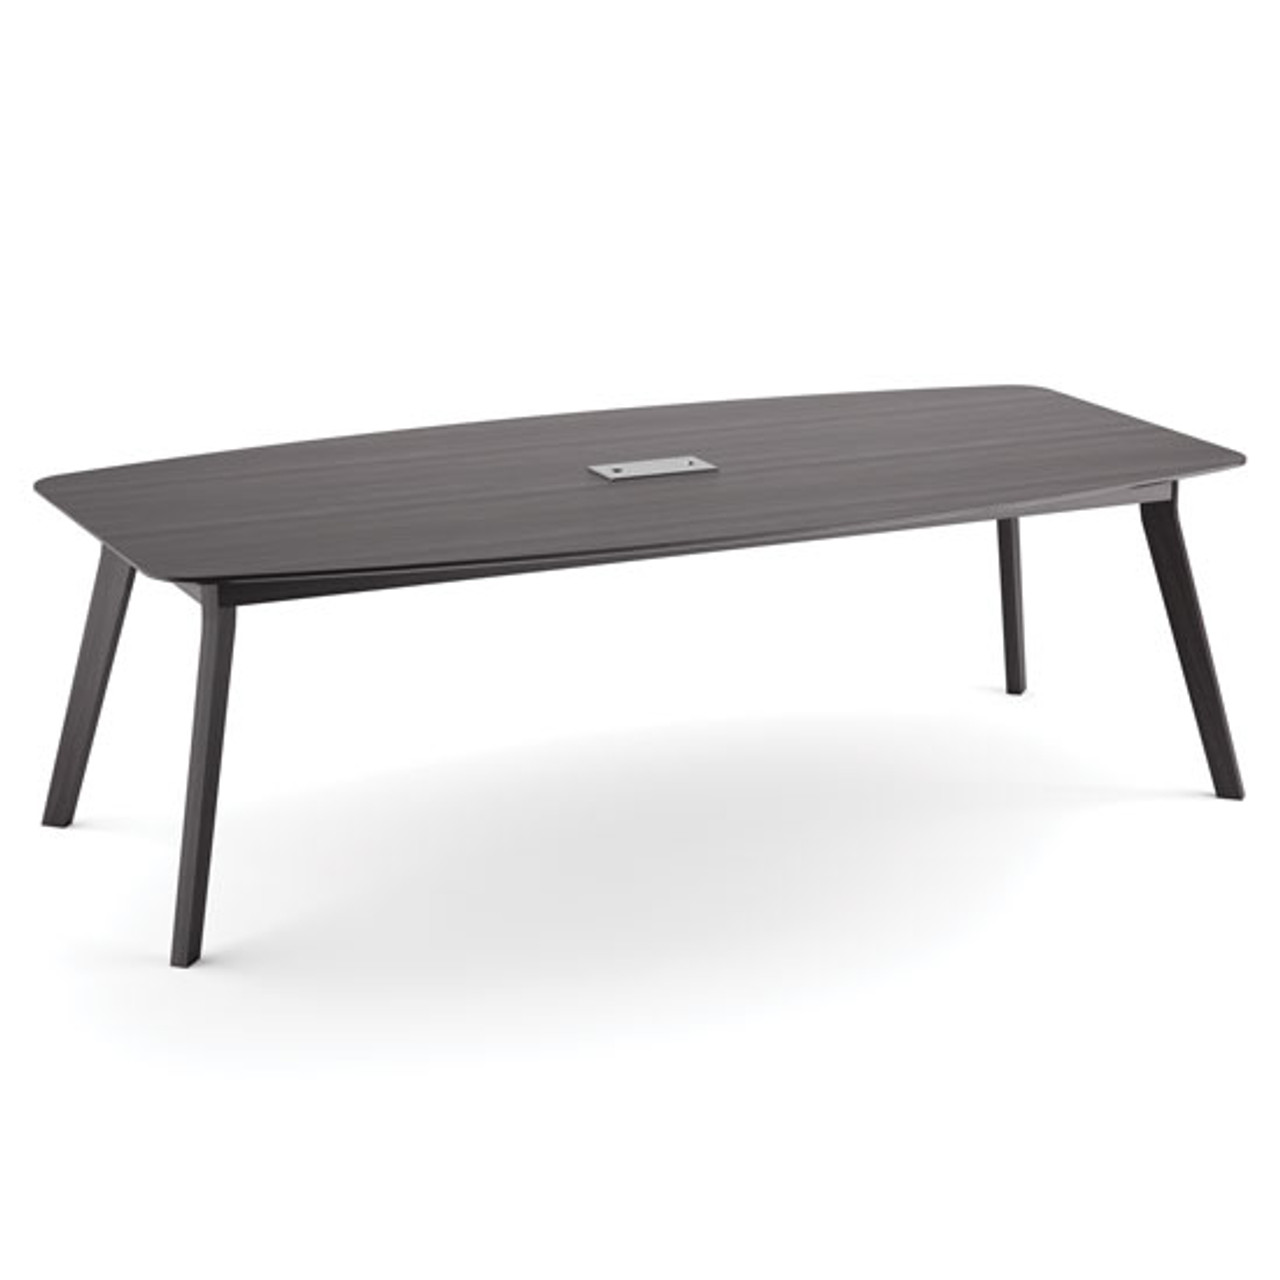 Sienna | 94″ Boat Shape Conference Table